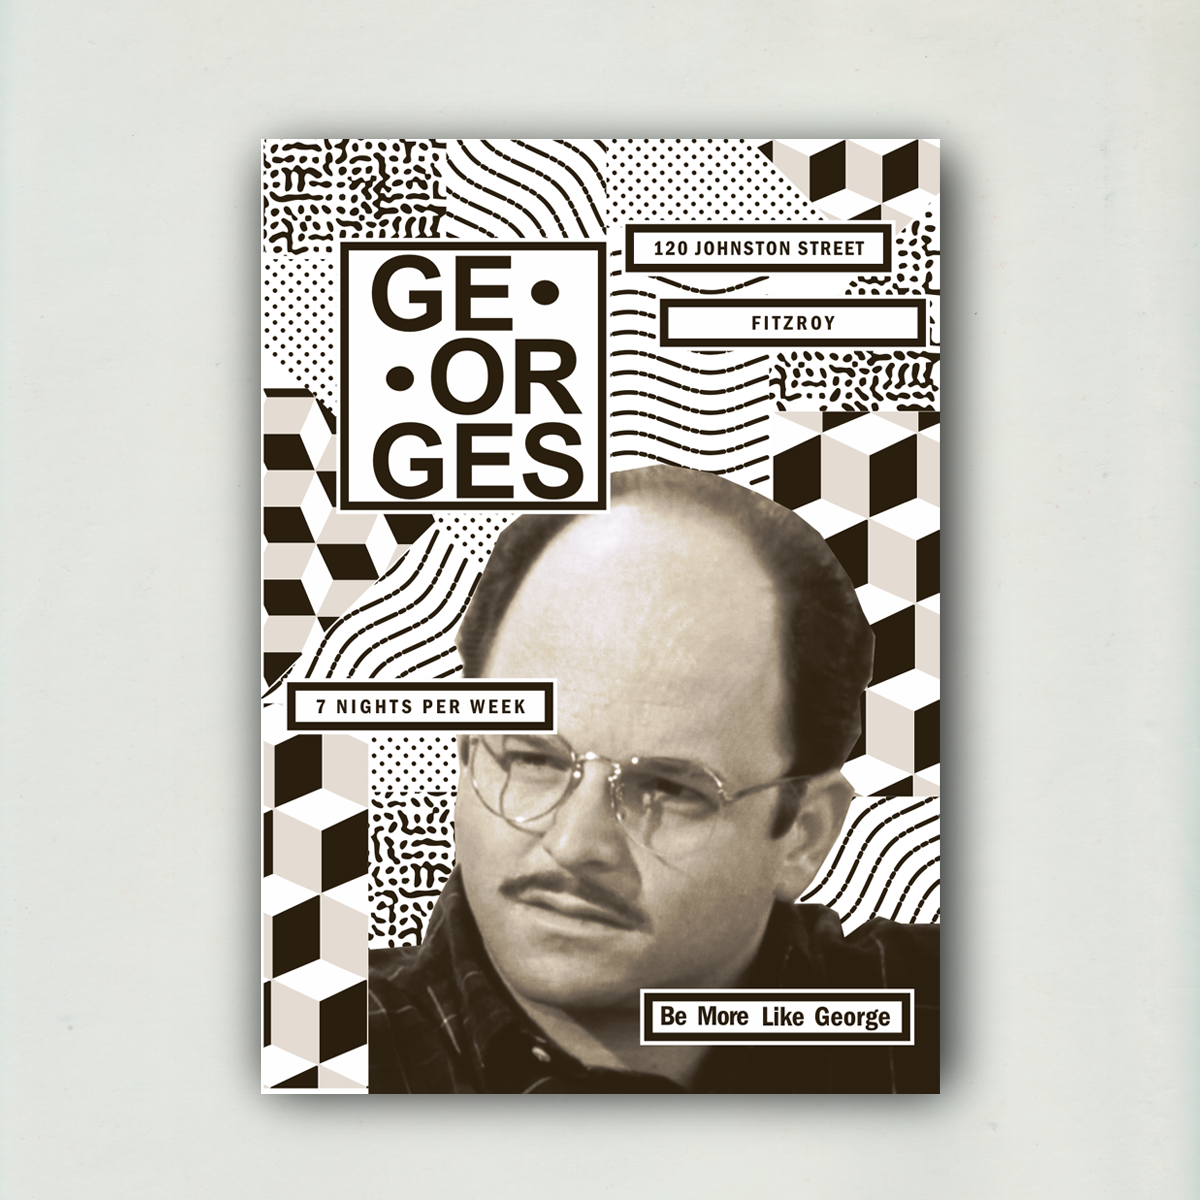 Georges Bar - A0 Poster - BNW - Upload 4